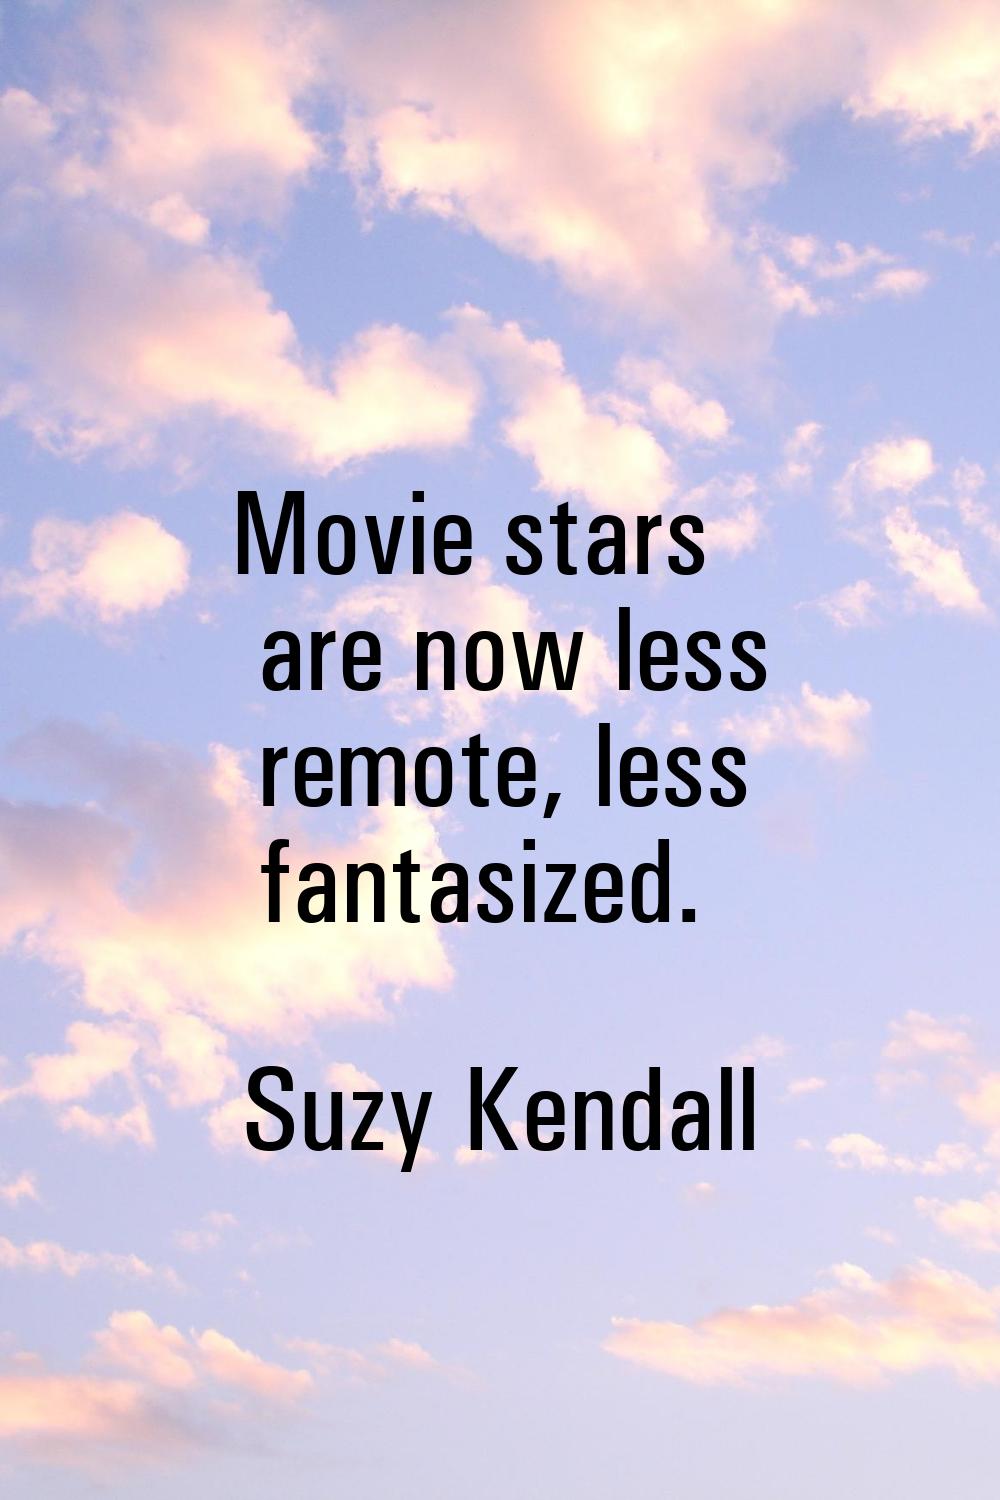 Movie stars are now less remote, less fantasized.